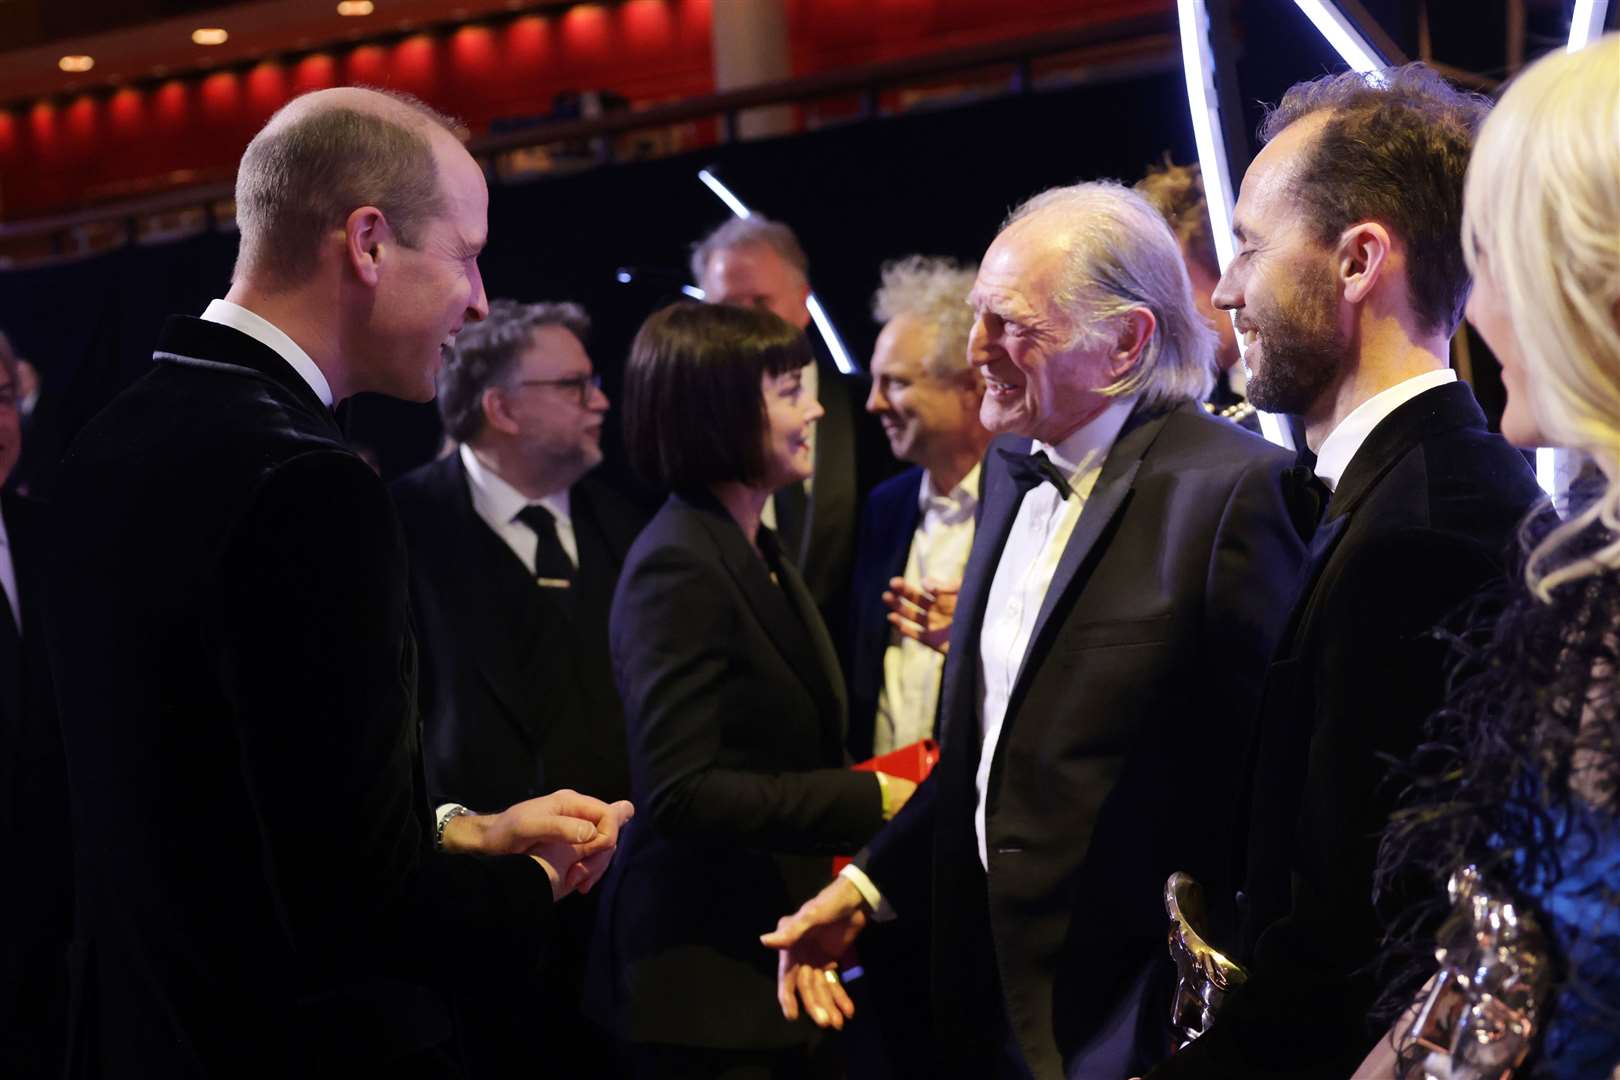 The Prince of Wales speaks to David Bradley (second right) (Chris Jackson/PA)